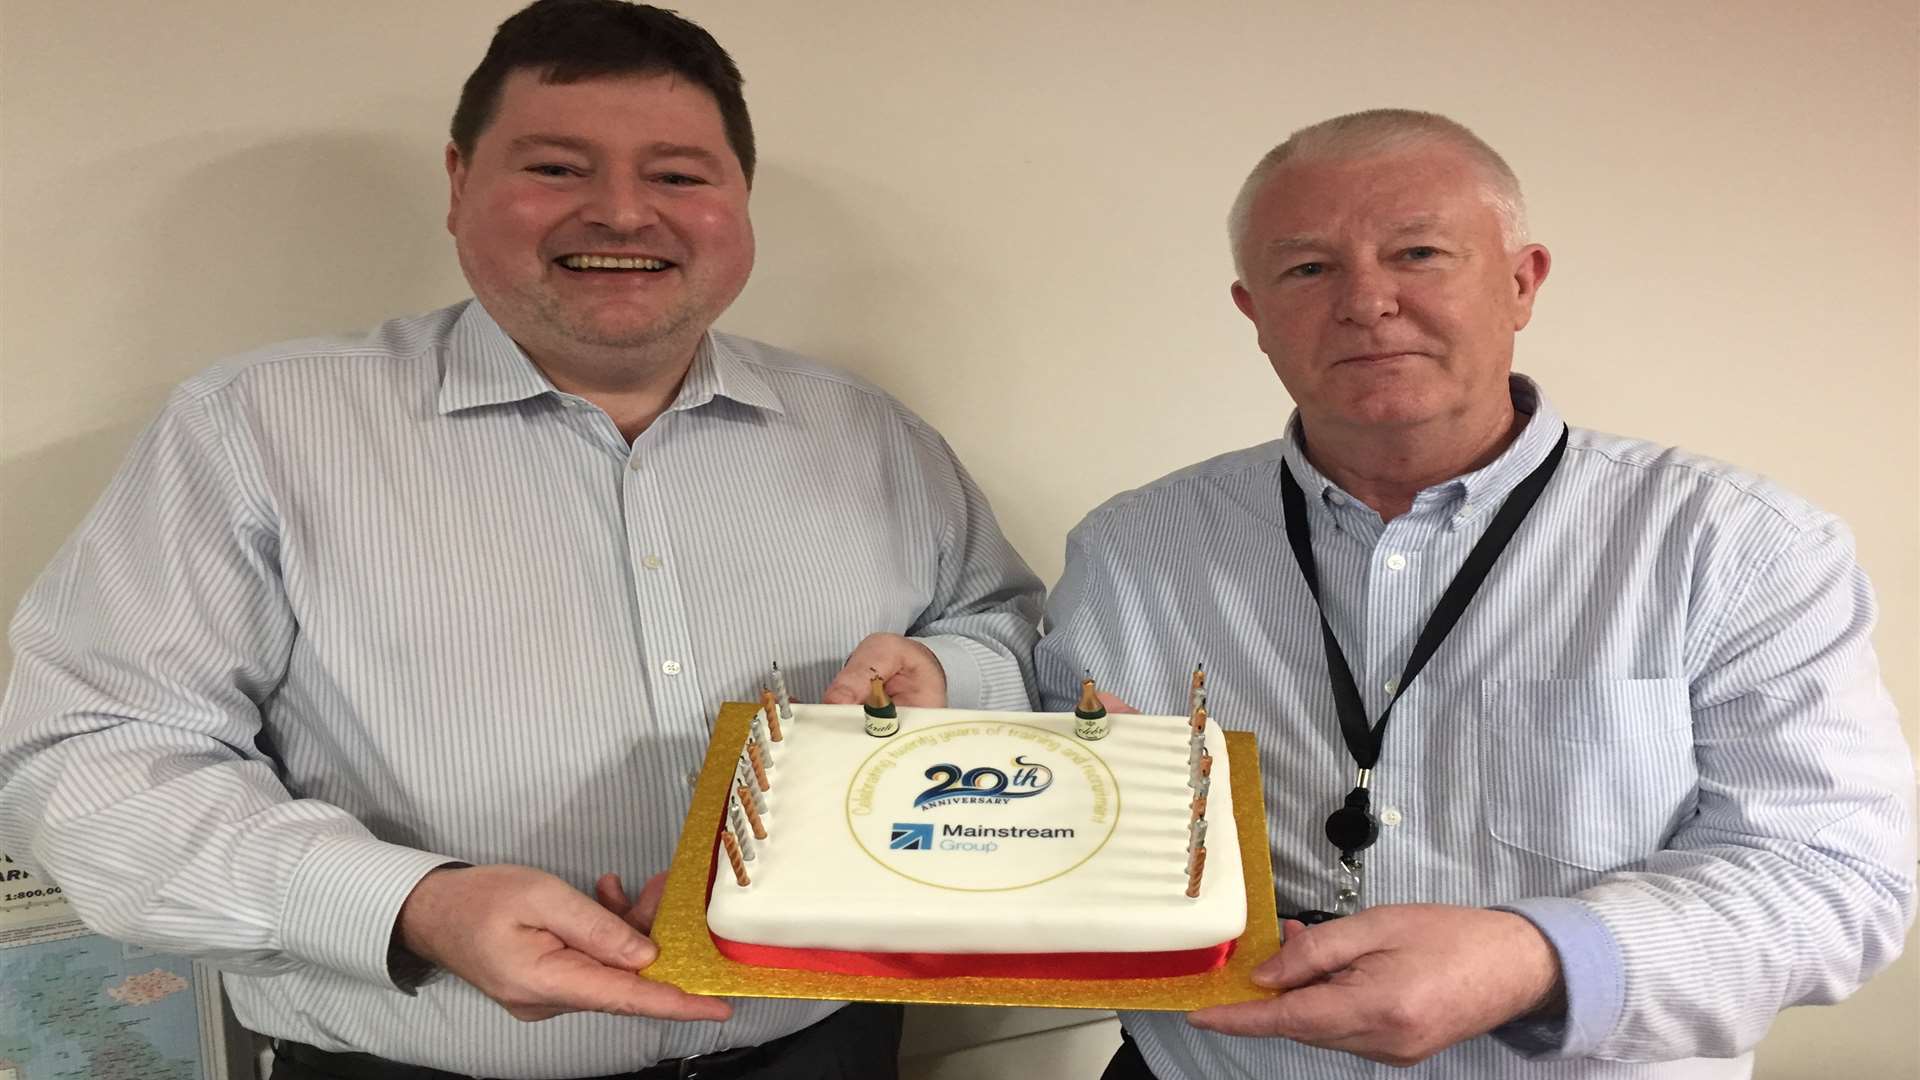 Managing director Mark Smith, left, and company co-founder Mike Smith celebrate Mainstream's 20th anniversary